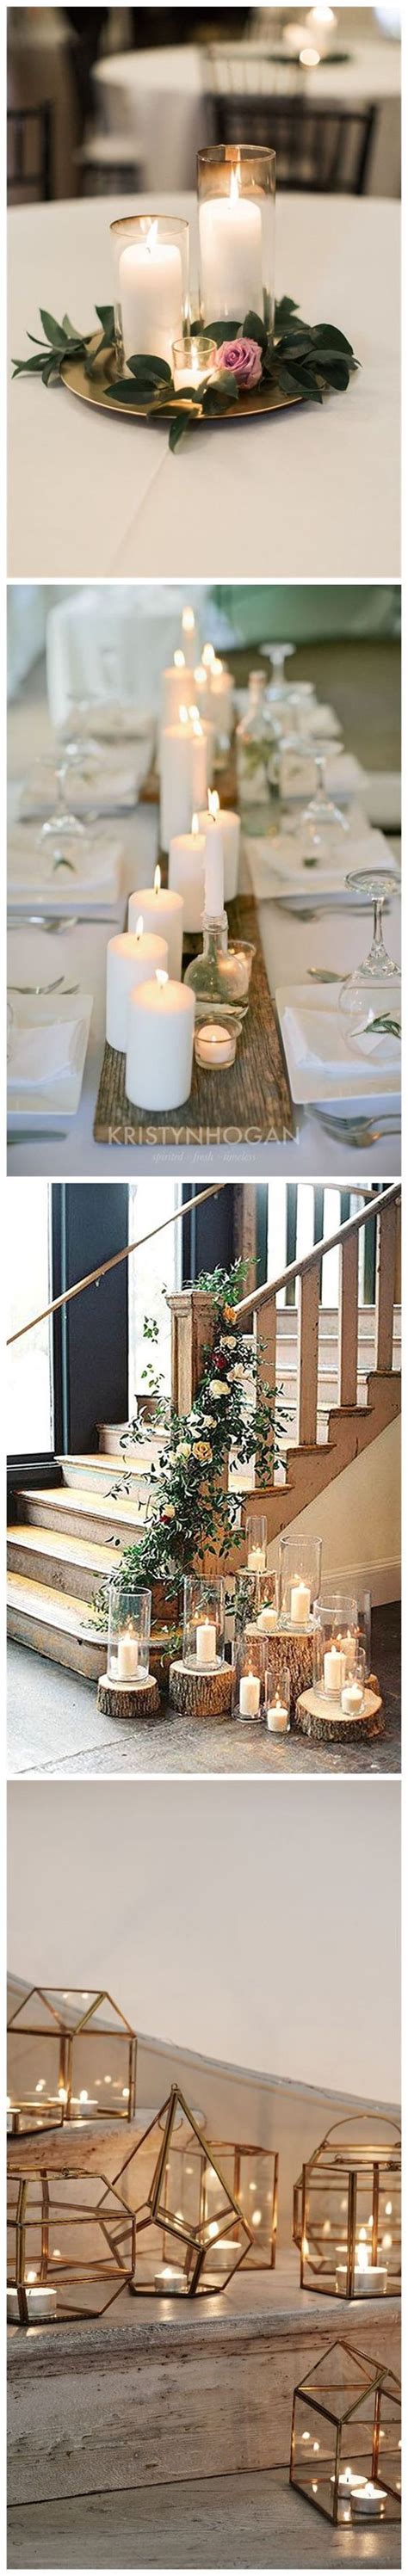 20 Stuning Wedding Candlelight Decoration Ideas You Will Love Med